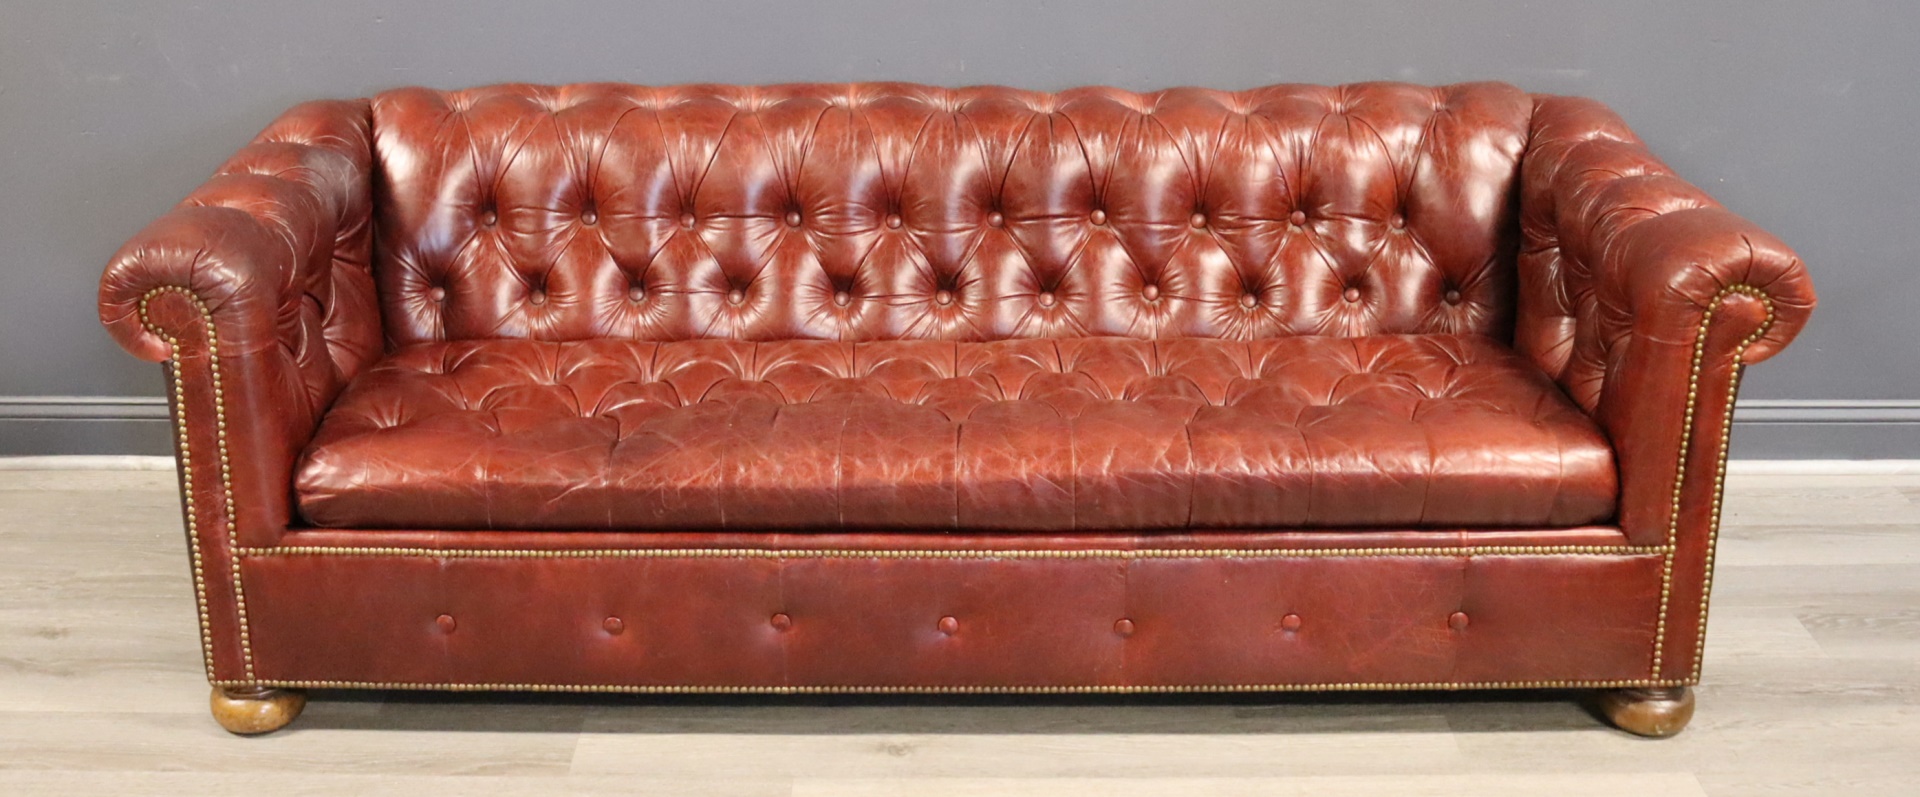 VINTAGE CHESTERFIELD LEATHER SOFA 3b6f98